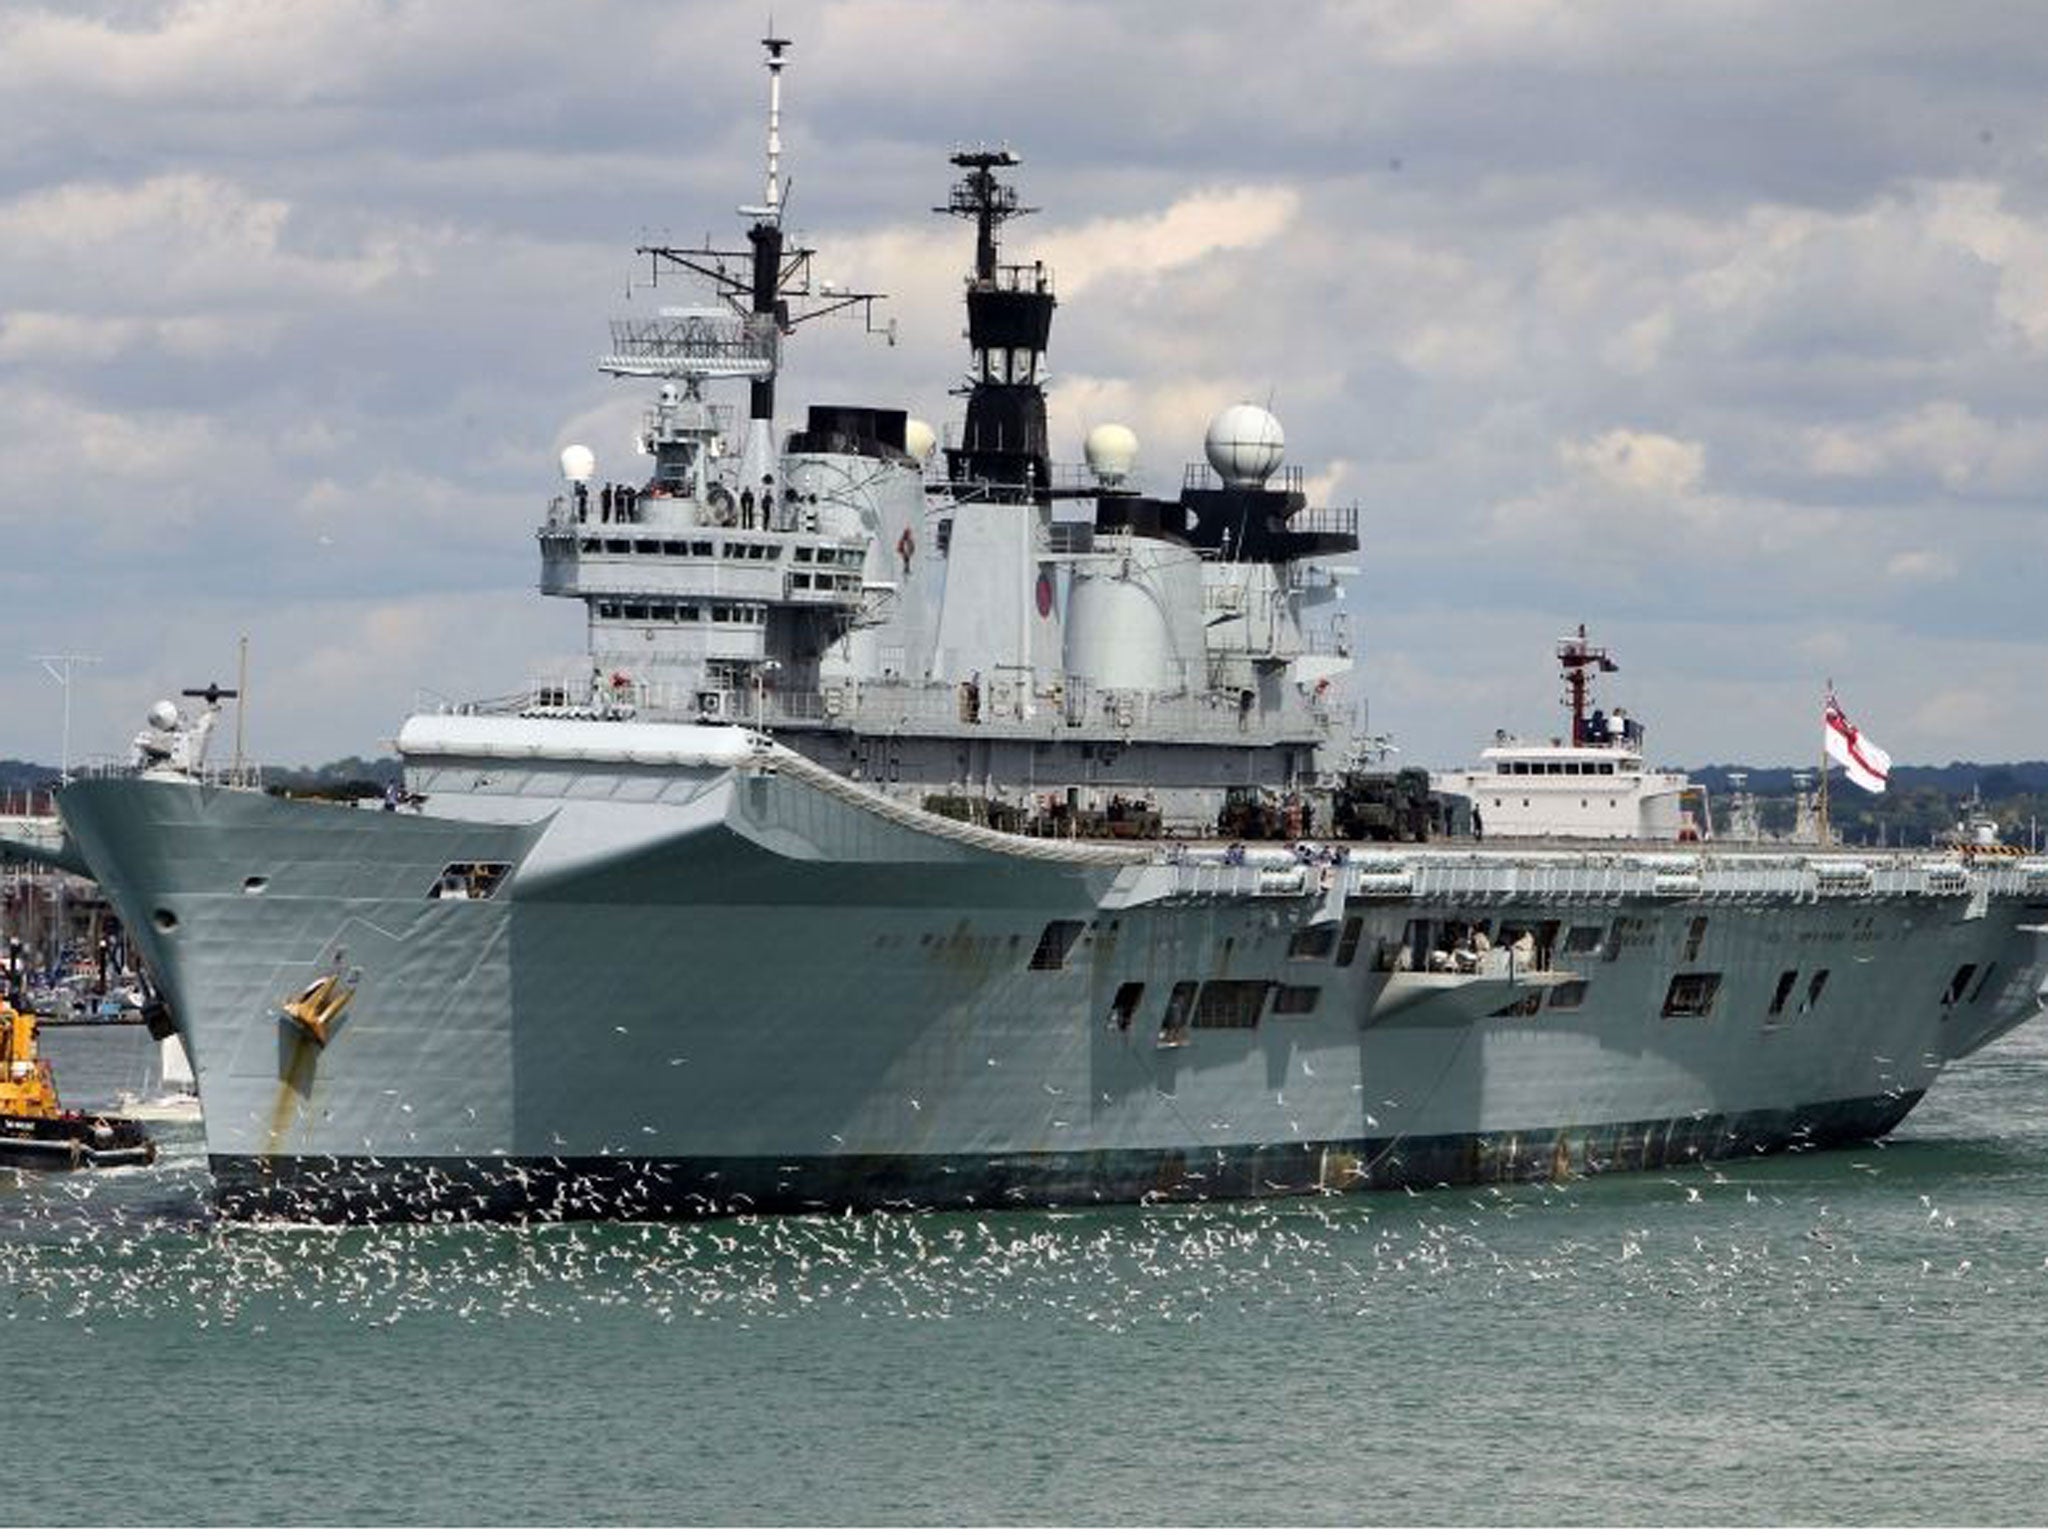 The HMS Illustrious will head to the Philippines